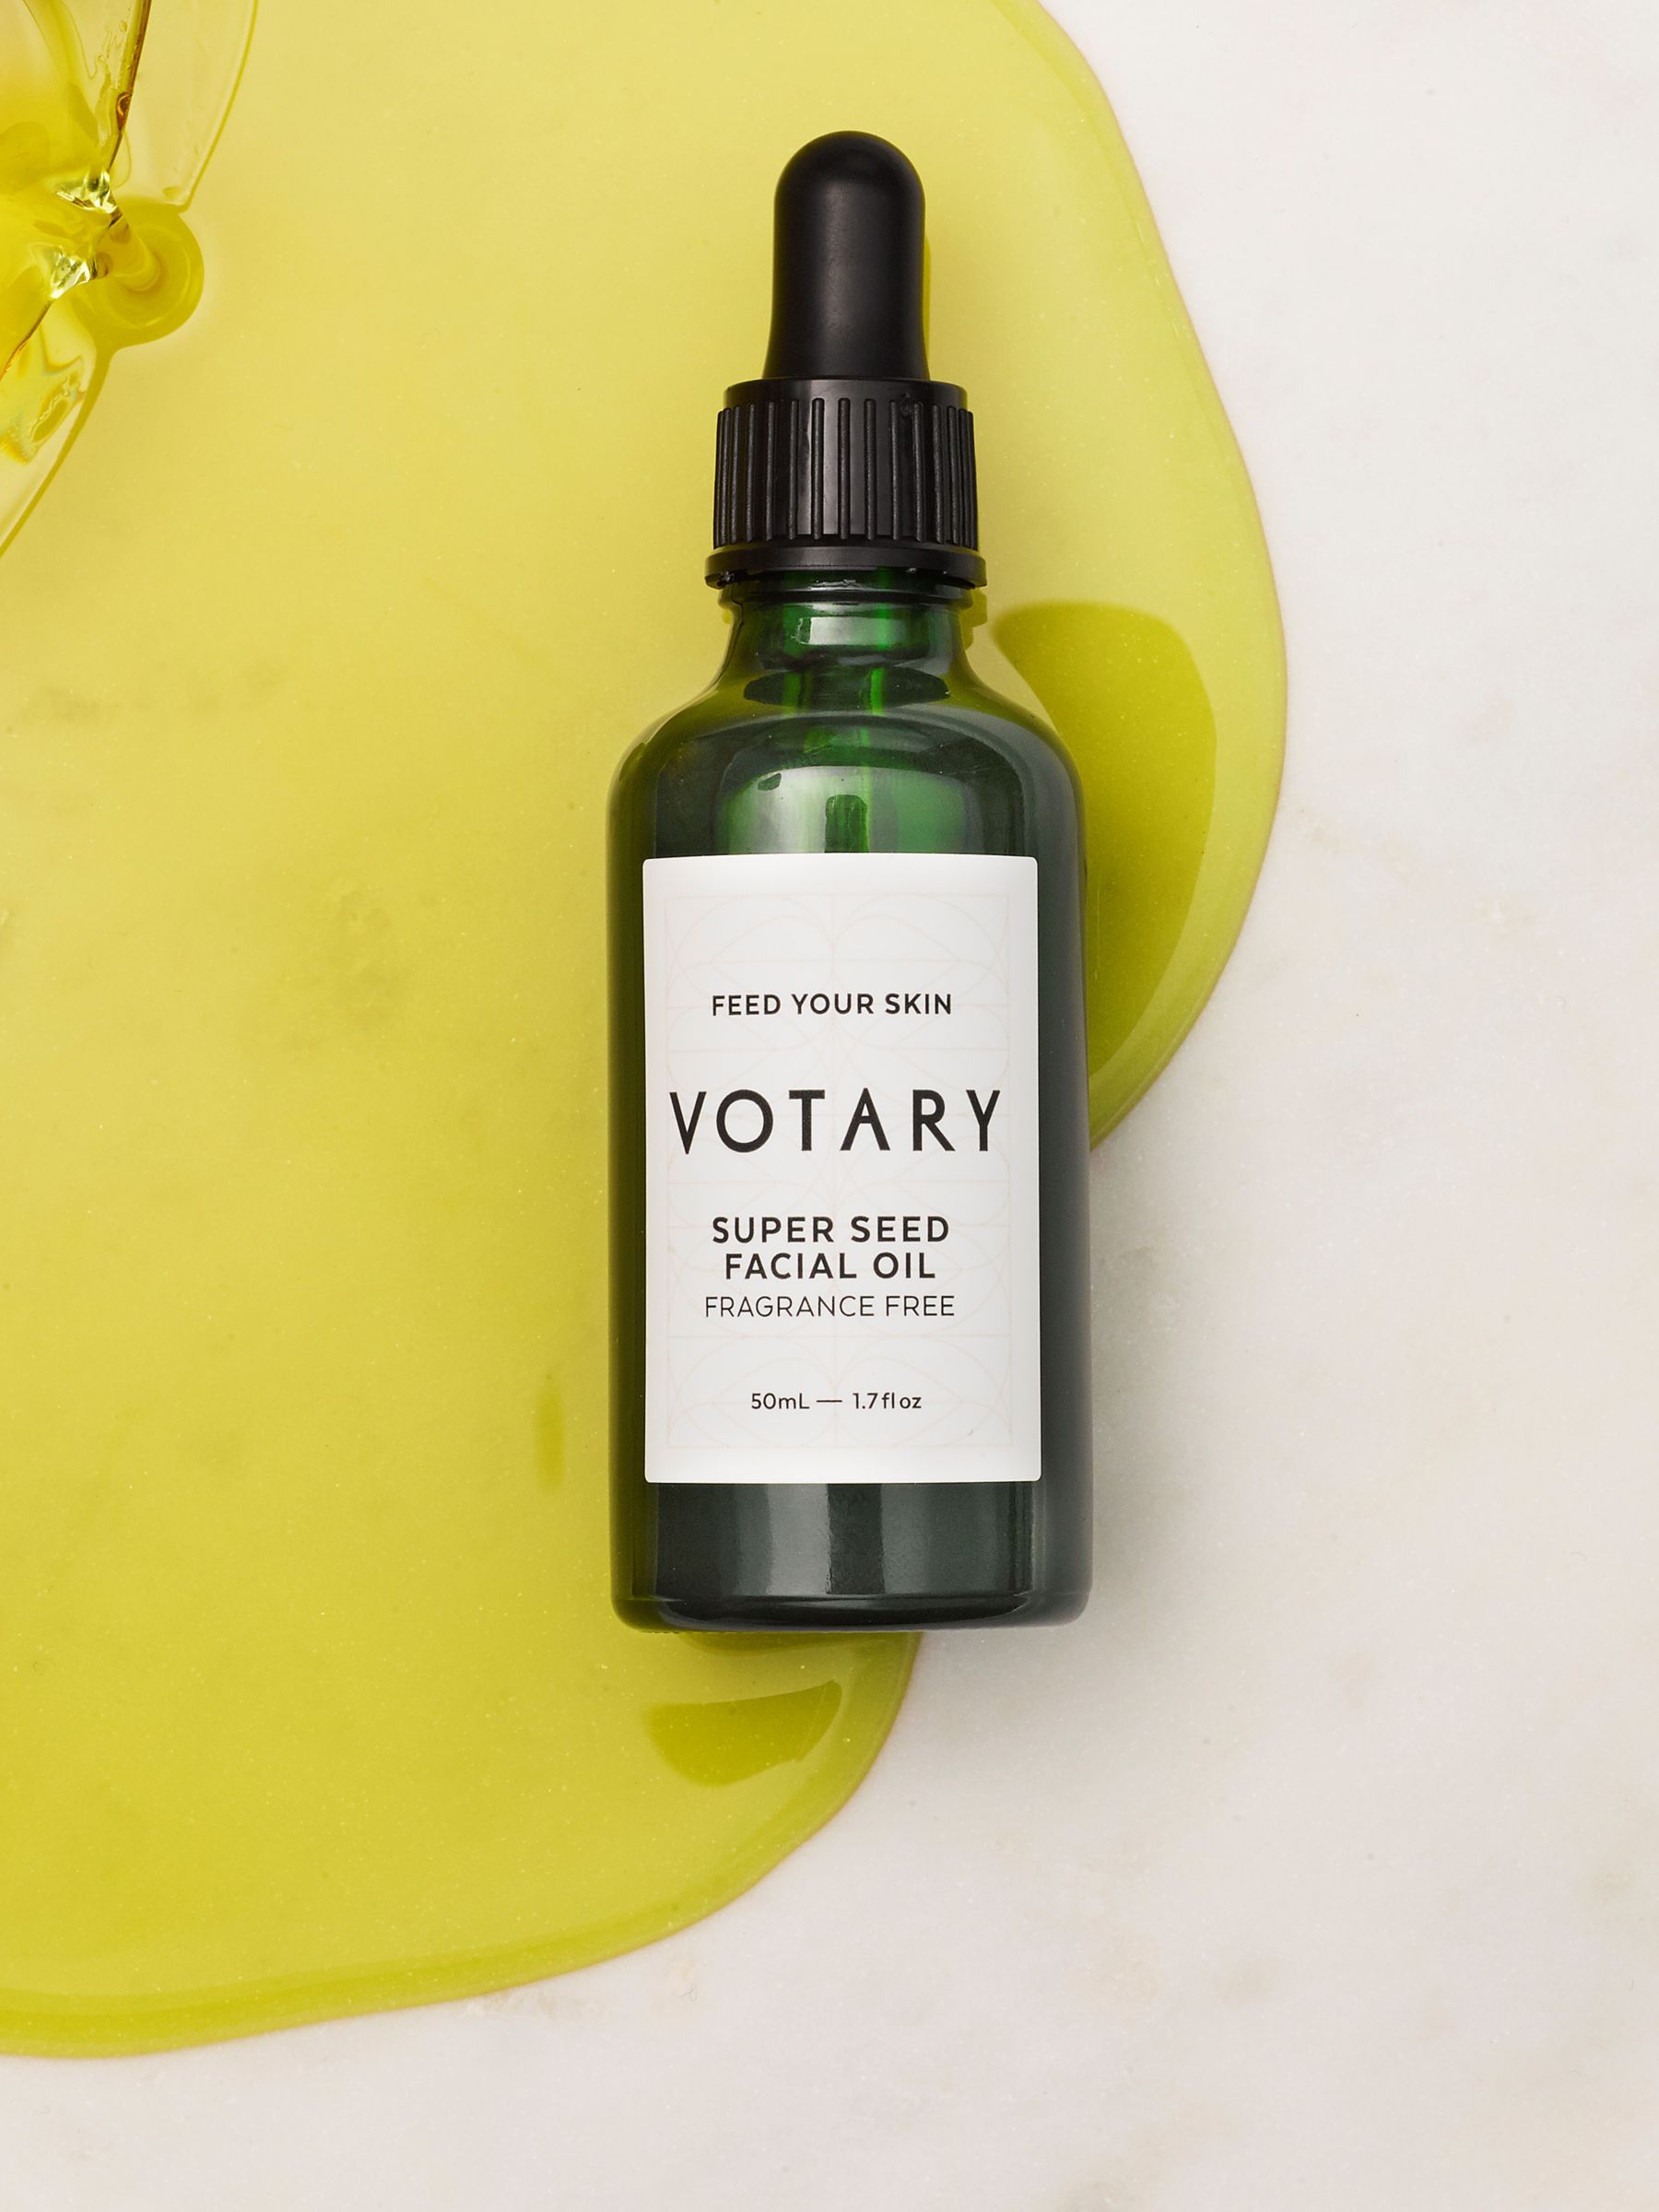 Votary Super Seed Facial Oil, Fragrance Free, 50ml 4